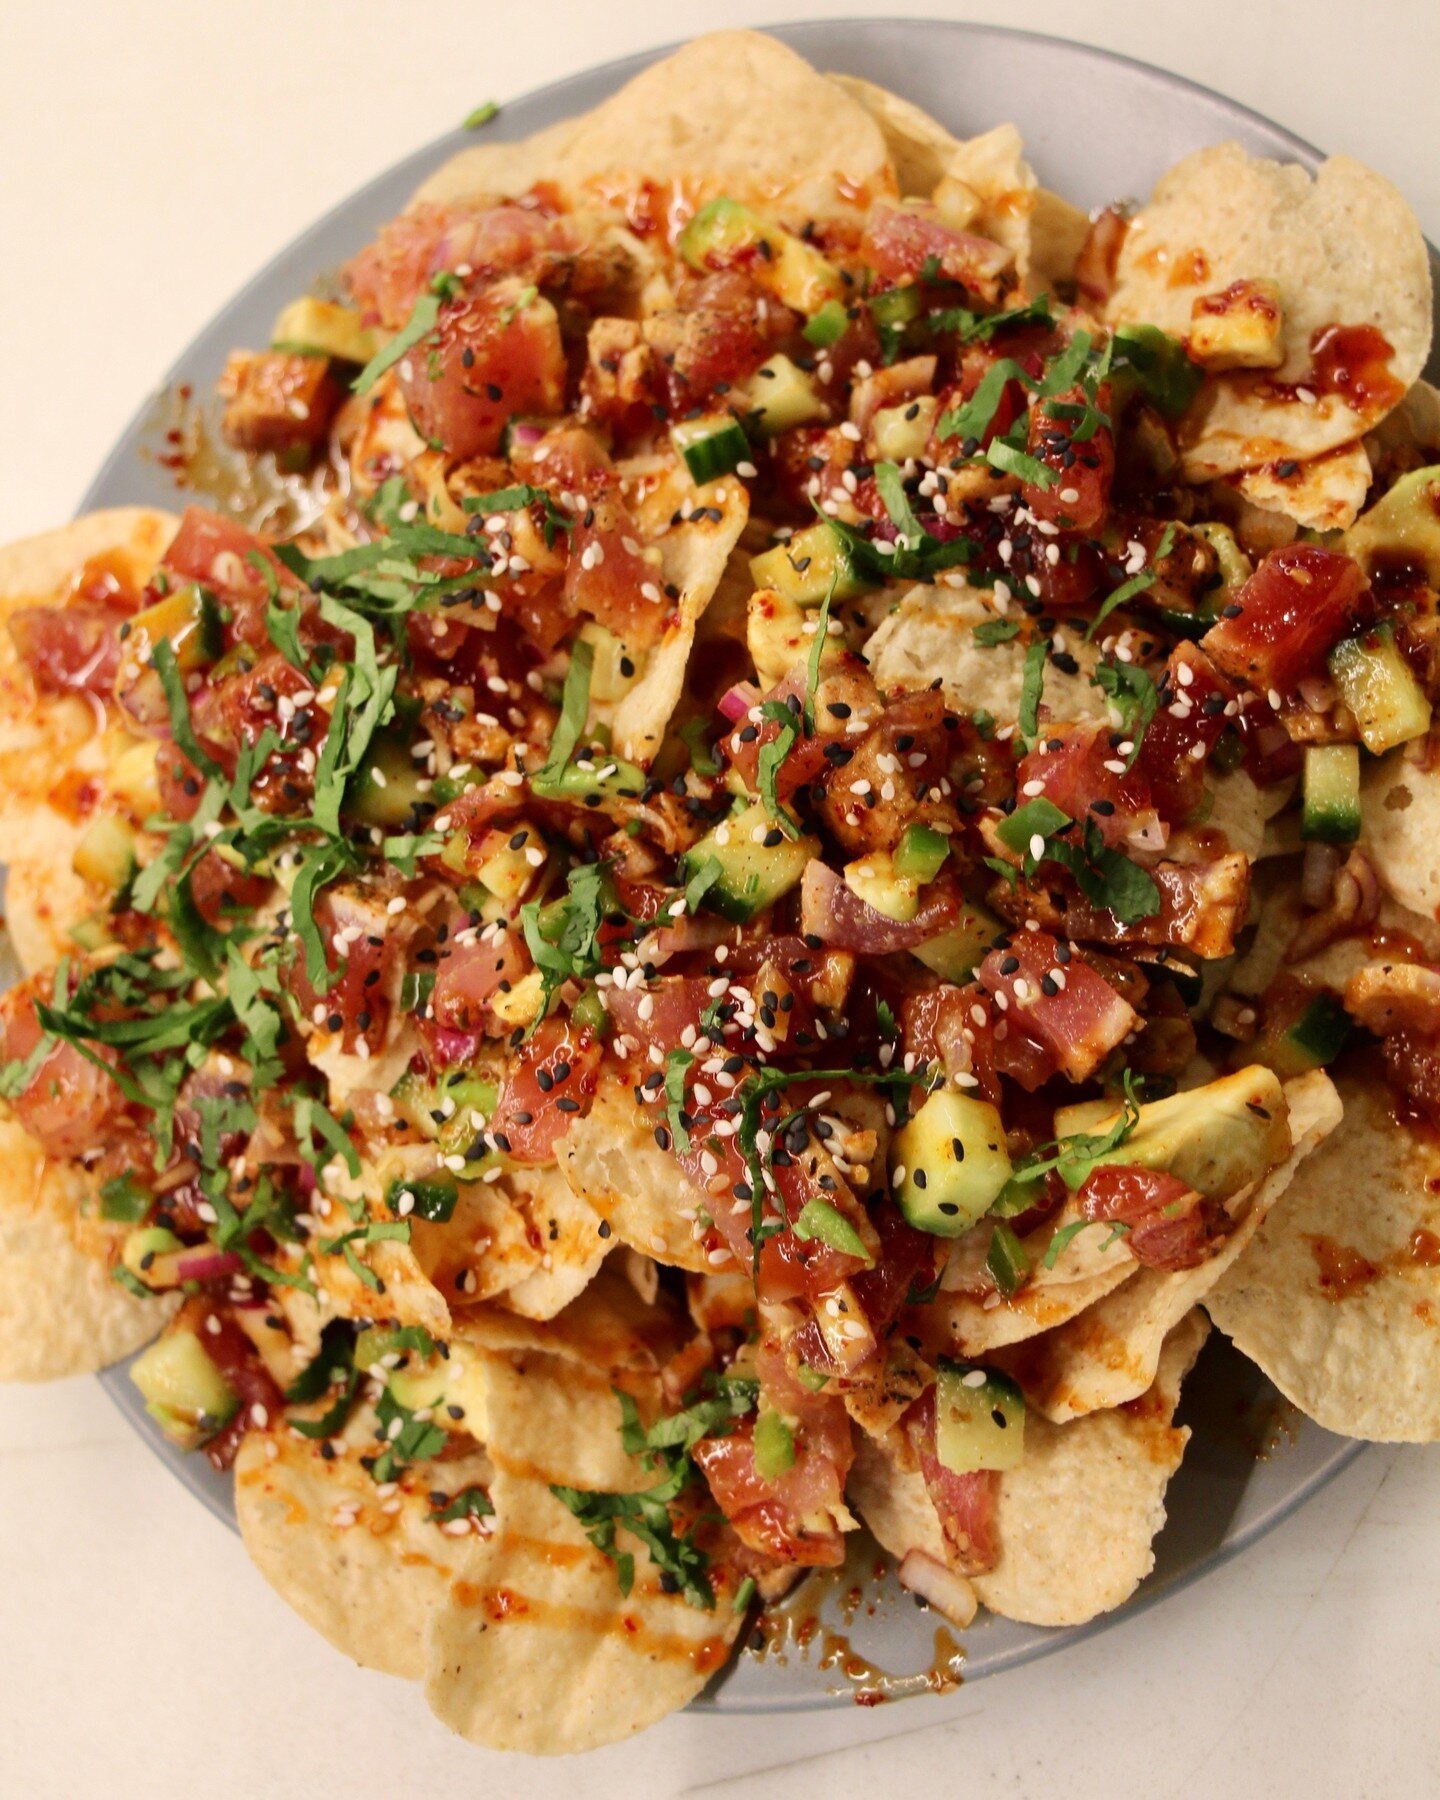 Superbowl appitizer ready in a flash:Ahi Tuna Nachos! Look out for the recipe video coming out next week!🏈🐟